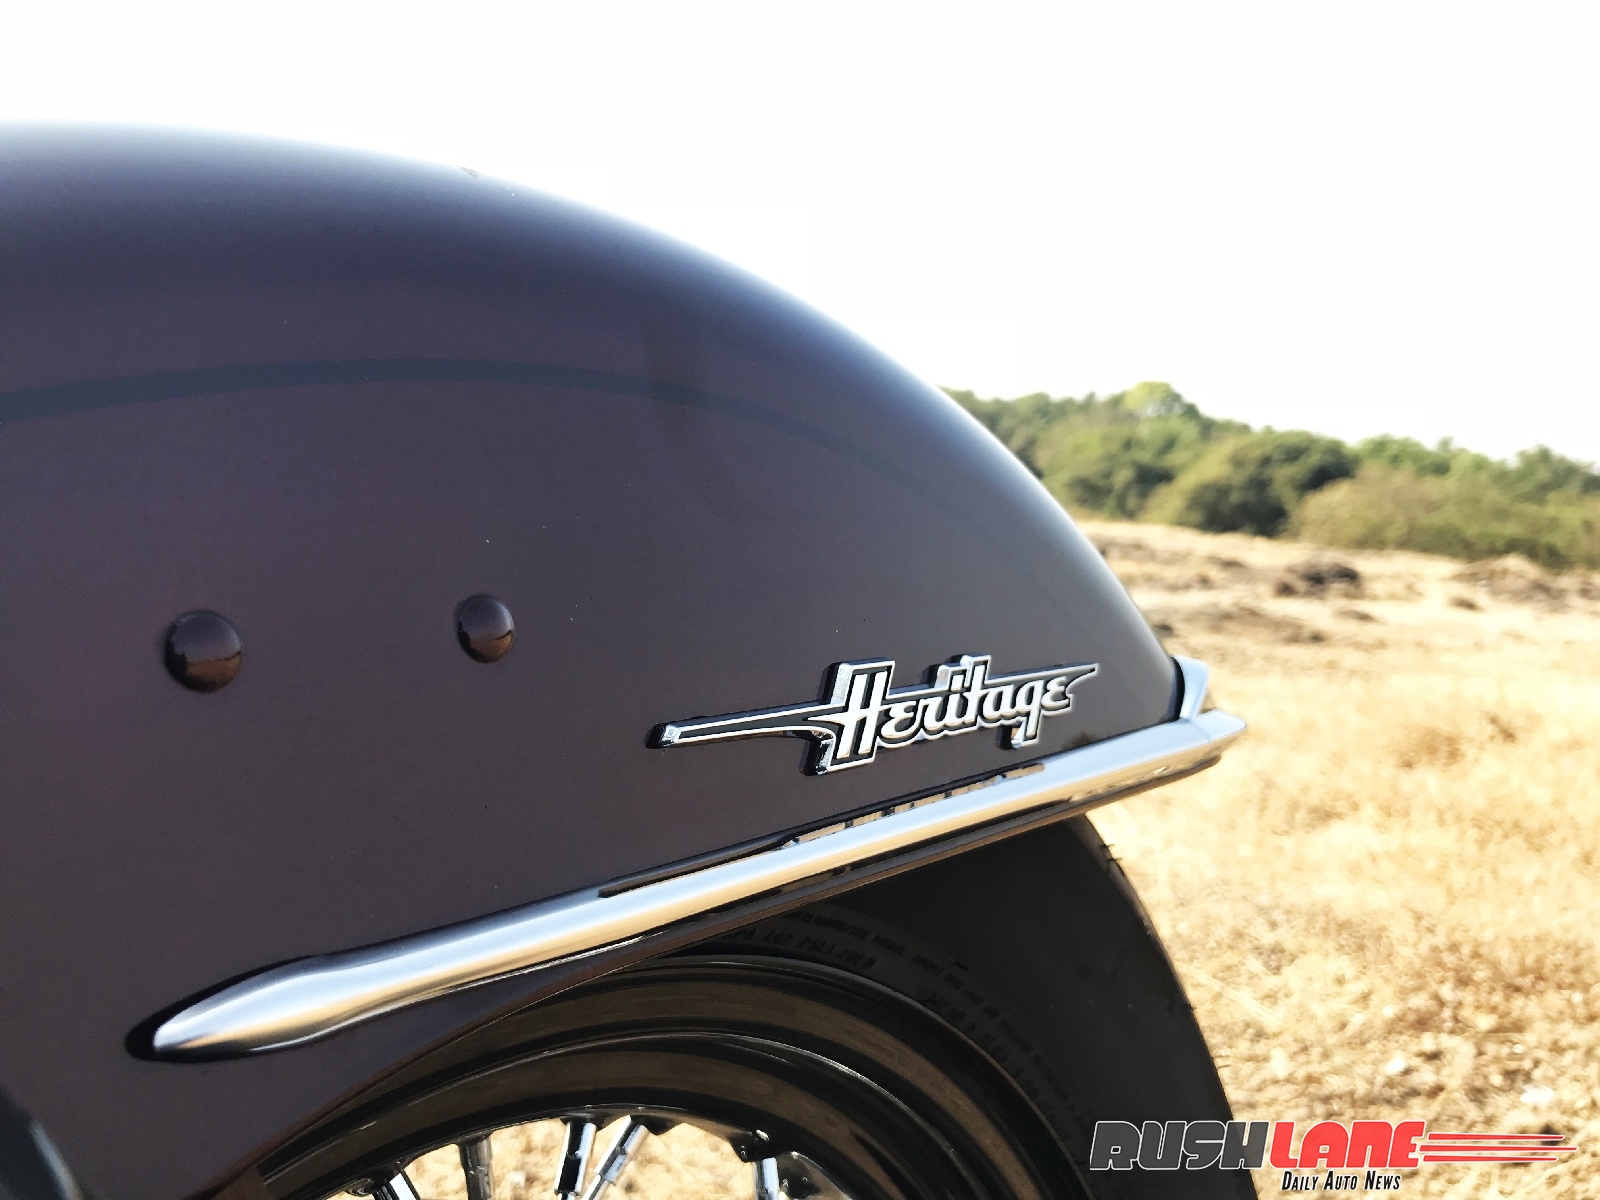 Harley Davidson Softail Heritage Classic Review Ameliorated Antiquity